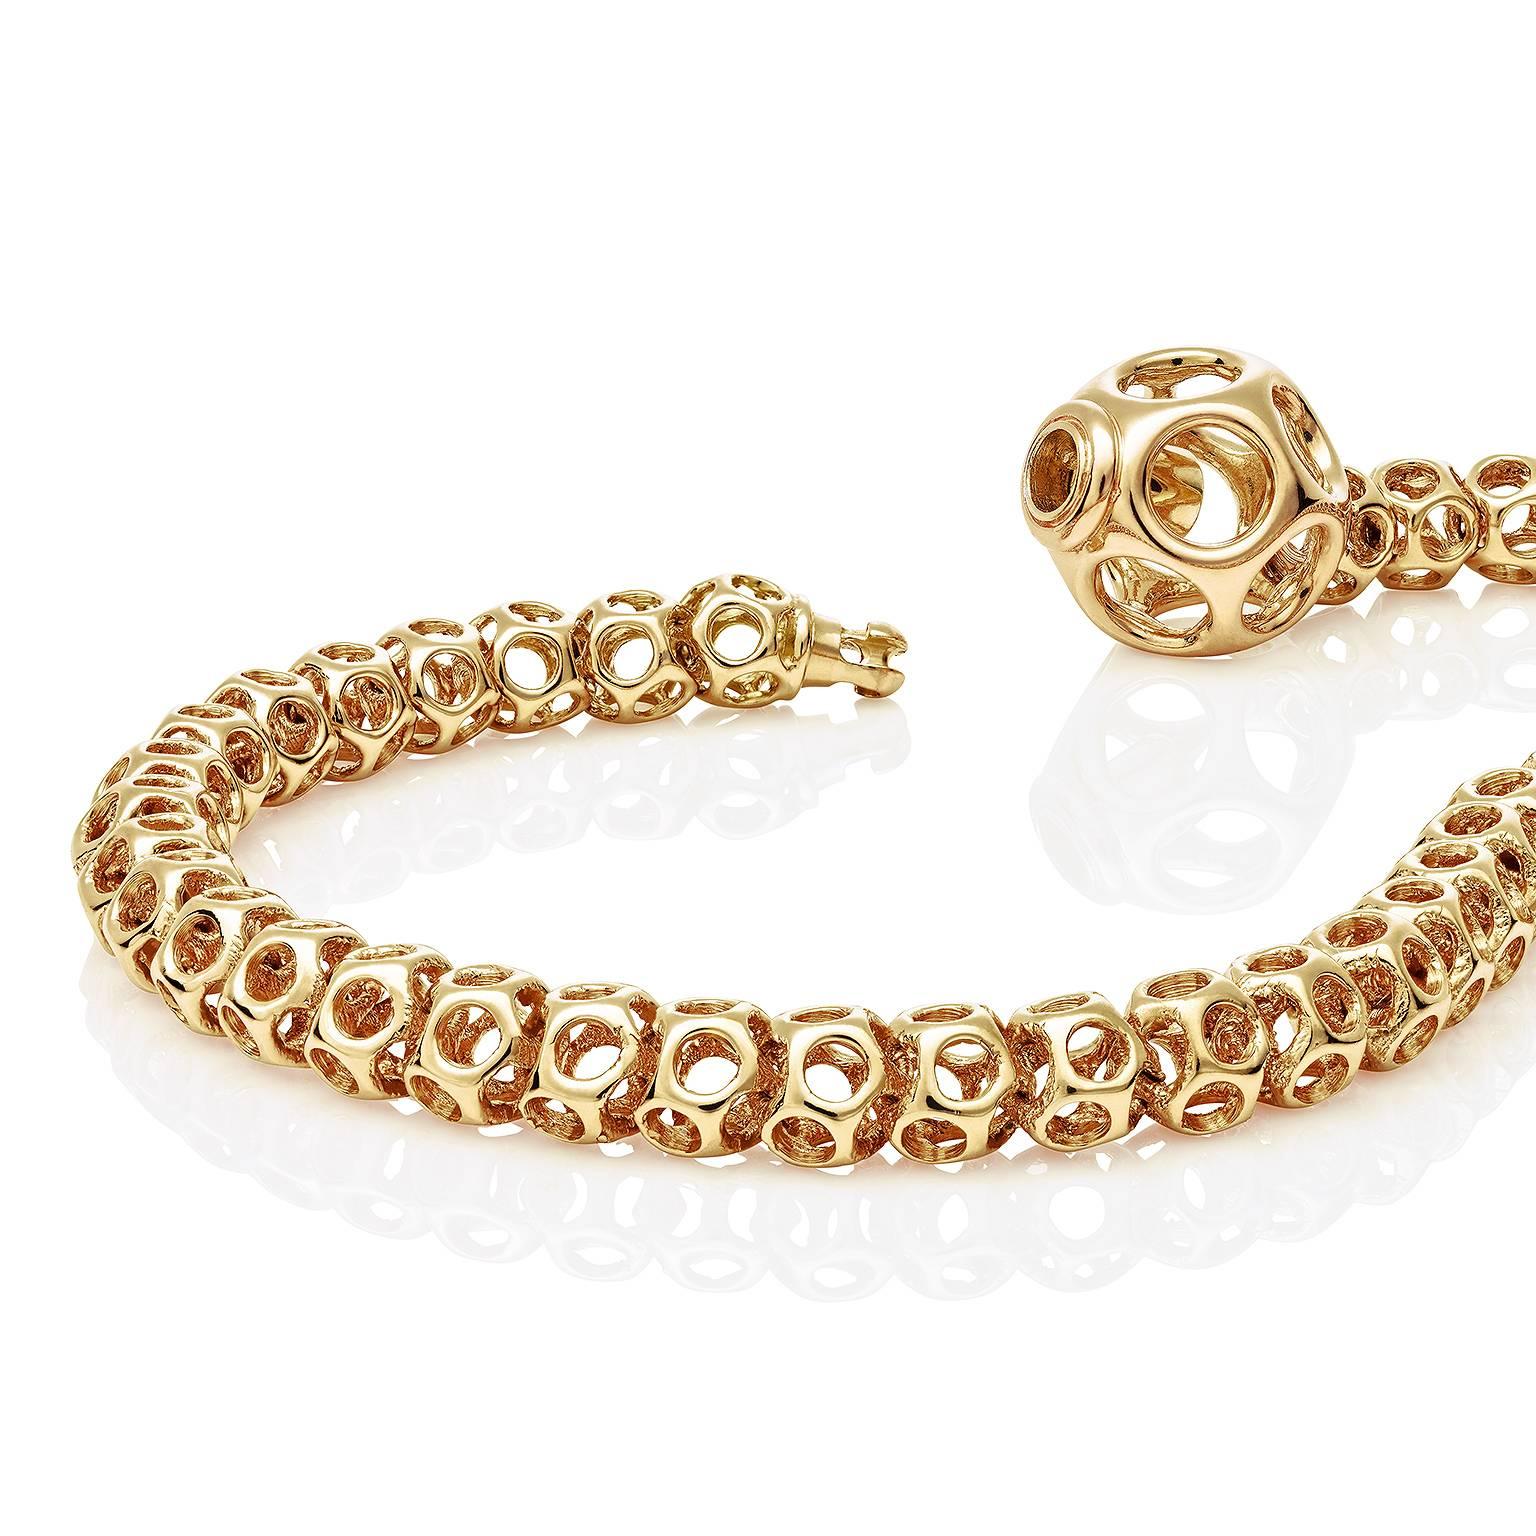 This ultra modern unique chain bracelet in 18 Karat yellow gold designed by Towe Norlen in 2005, is made by the high-tech free form fabrication method laser sintering of gold. The special link system makes this chain highly flexible and comfortable.